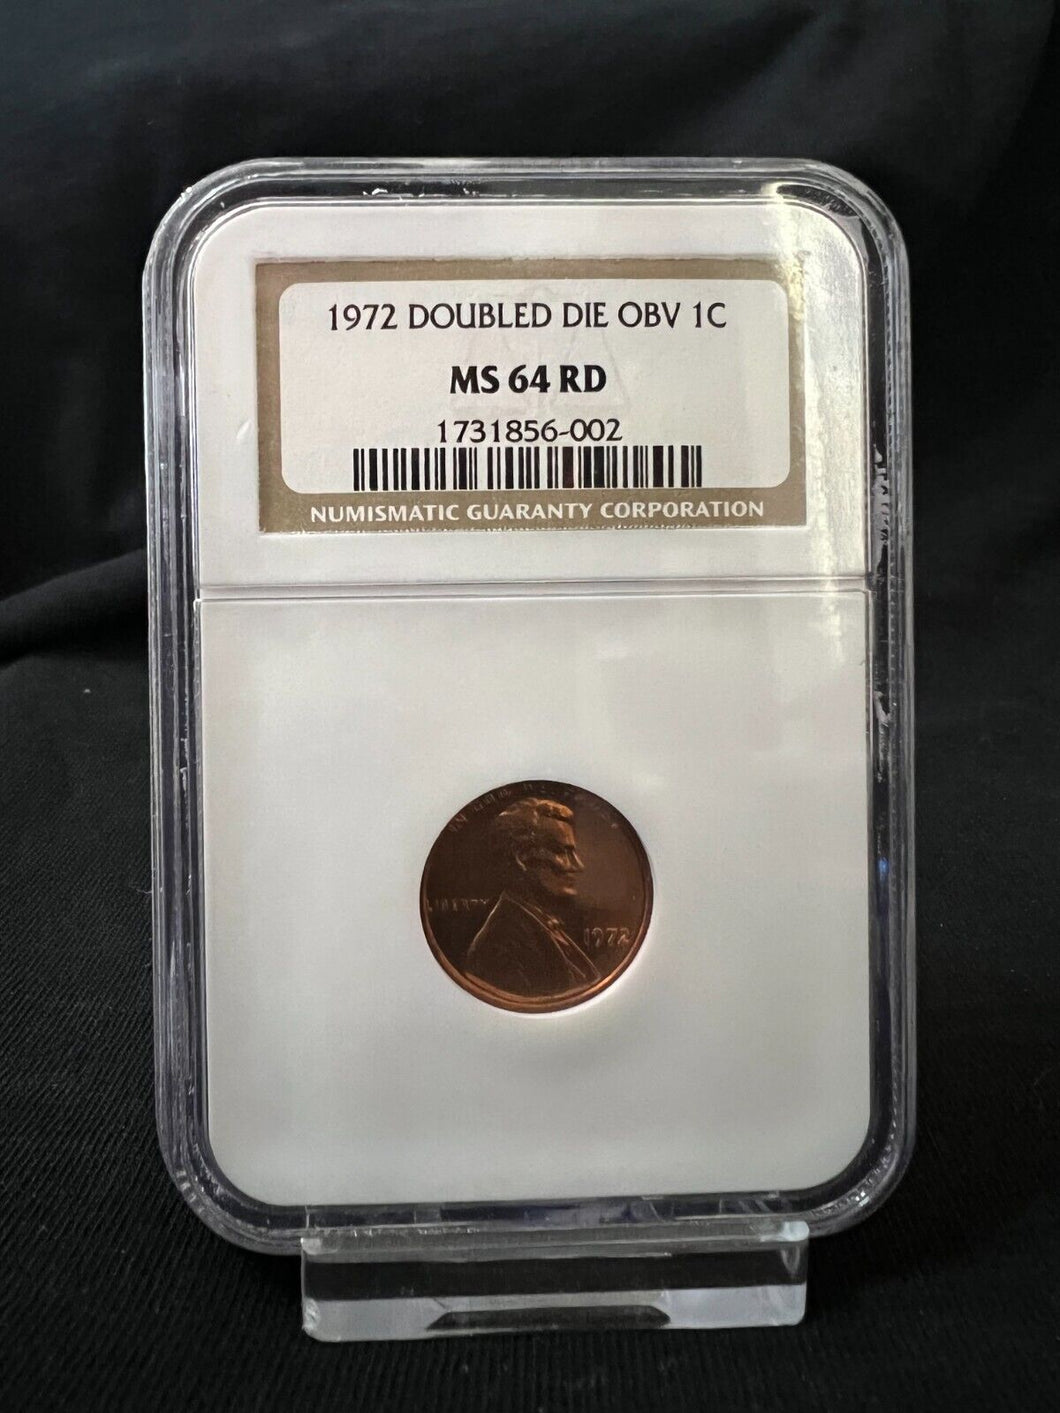 1972 1¢ Doubled Die Obverse Lincoln Cent DDO NGC MS64 RD Uncirculated Gem